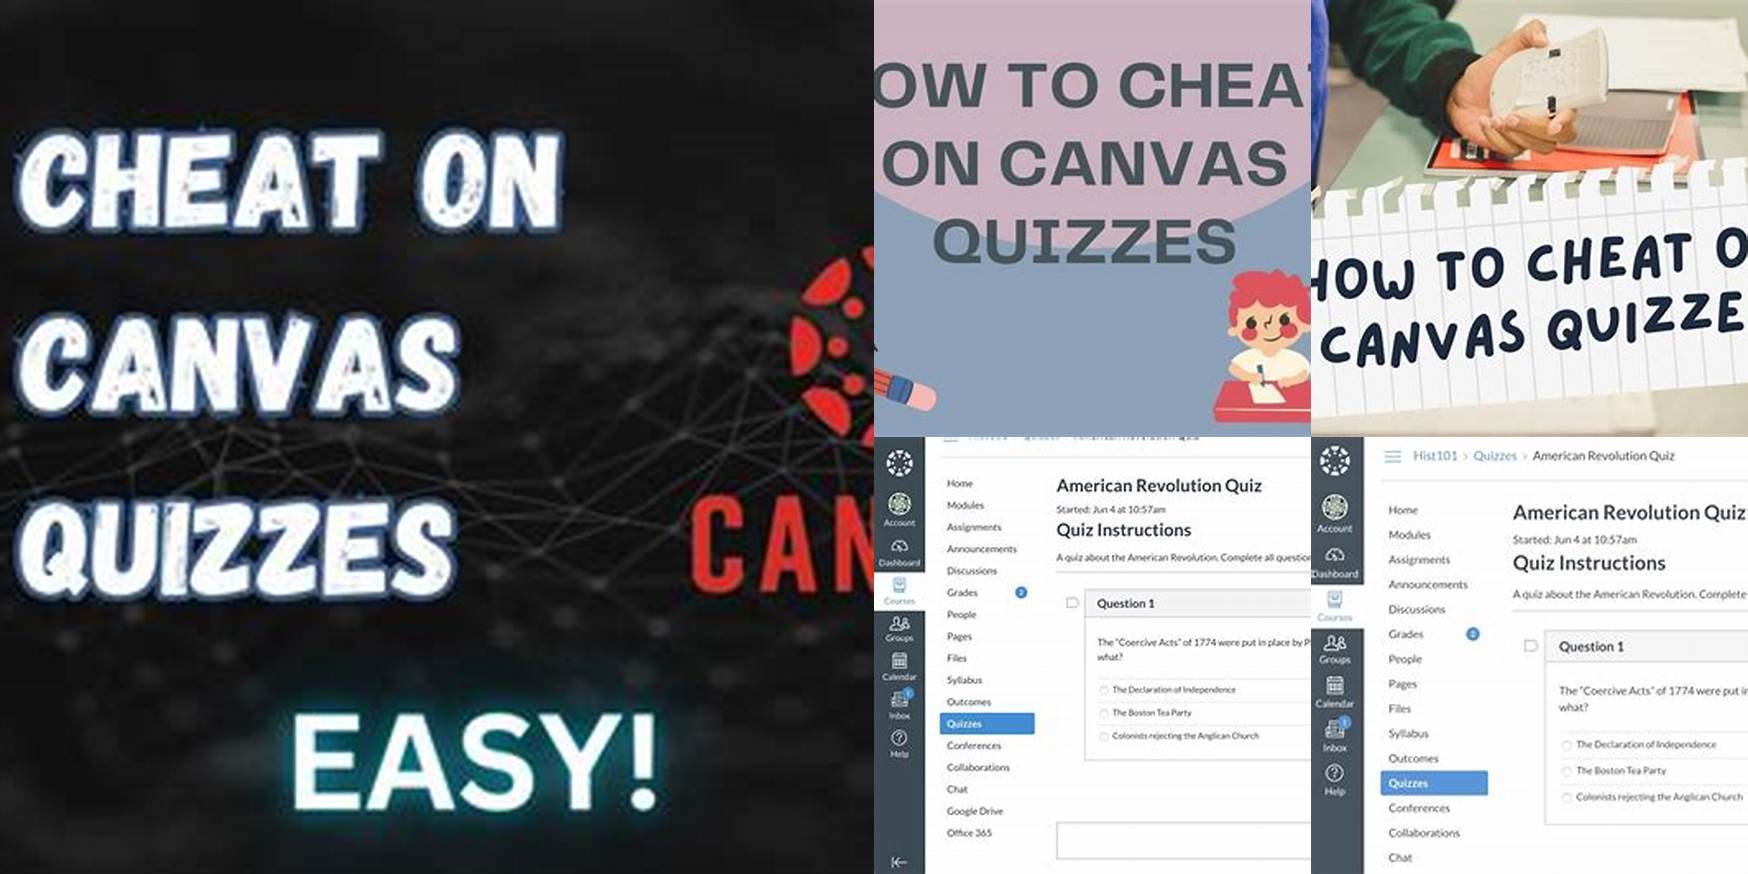 How To Cheat On Canvas Quizzes Reddit